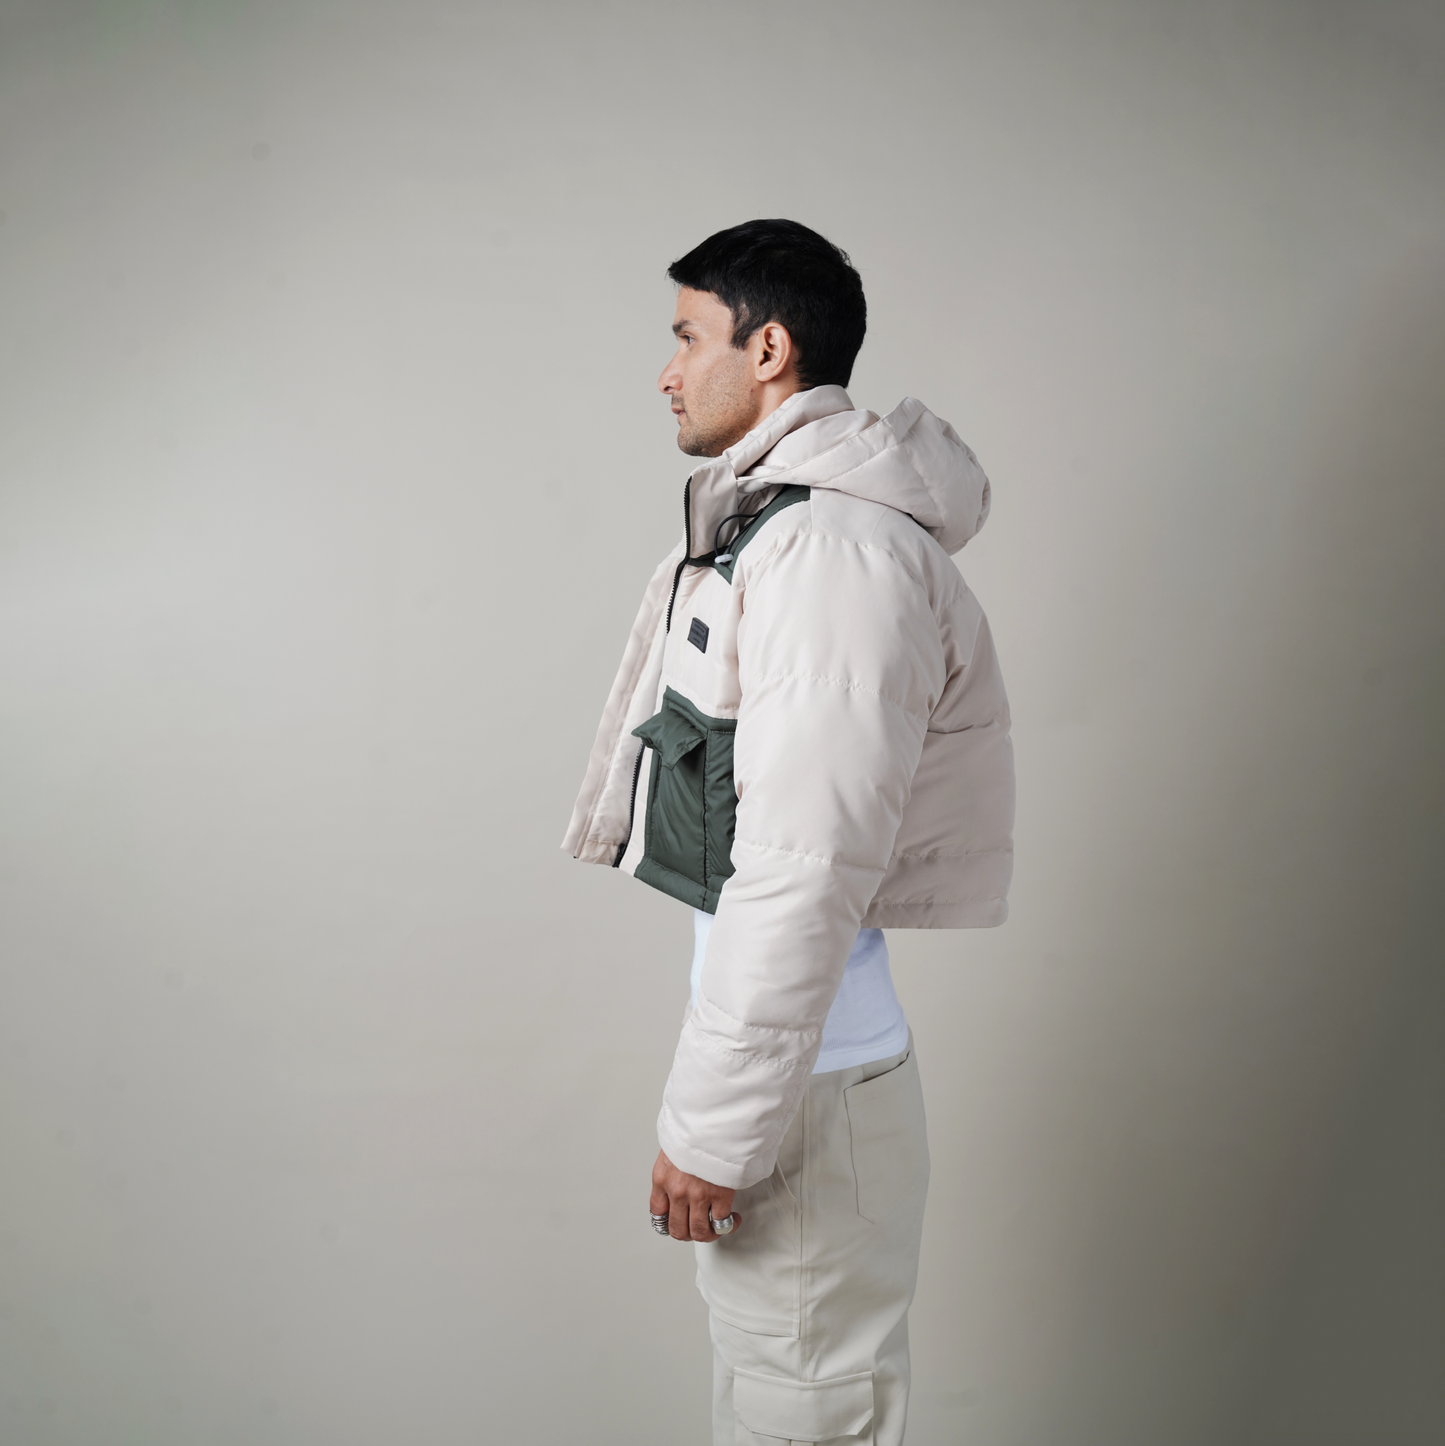 The Cropped Puffer Jacket,Polyester fabric,  two-toned, jetted pockets, pipe-in details, Welt pocket,  Warping Theories Rubber patch on the chest, high neck collar. The detachable hoodie, Unisex, Oversized Fit ,Wind Proof, Water Repellant, pufferjacket, northface puffer, puffer, puffercoat,superpuff aritzia, mens puffer, womens puffer, northface cropped puffer, womenswear, menswear, baggy fit, oversized fit, warping theories, people also ask 